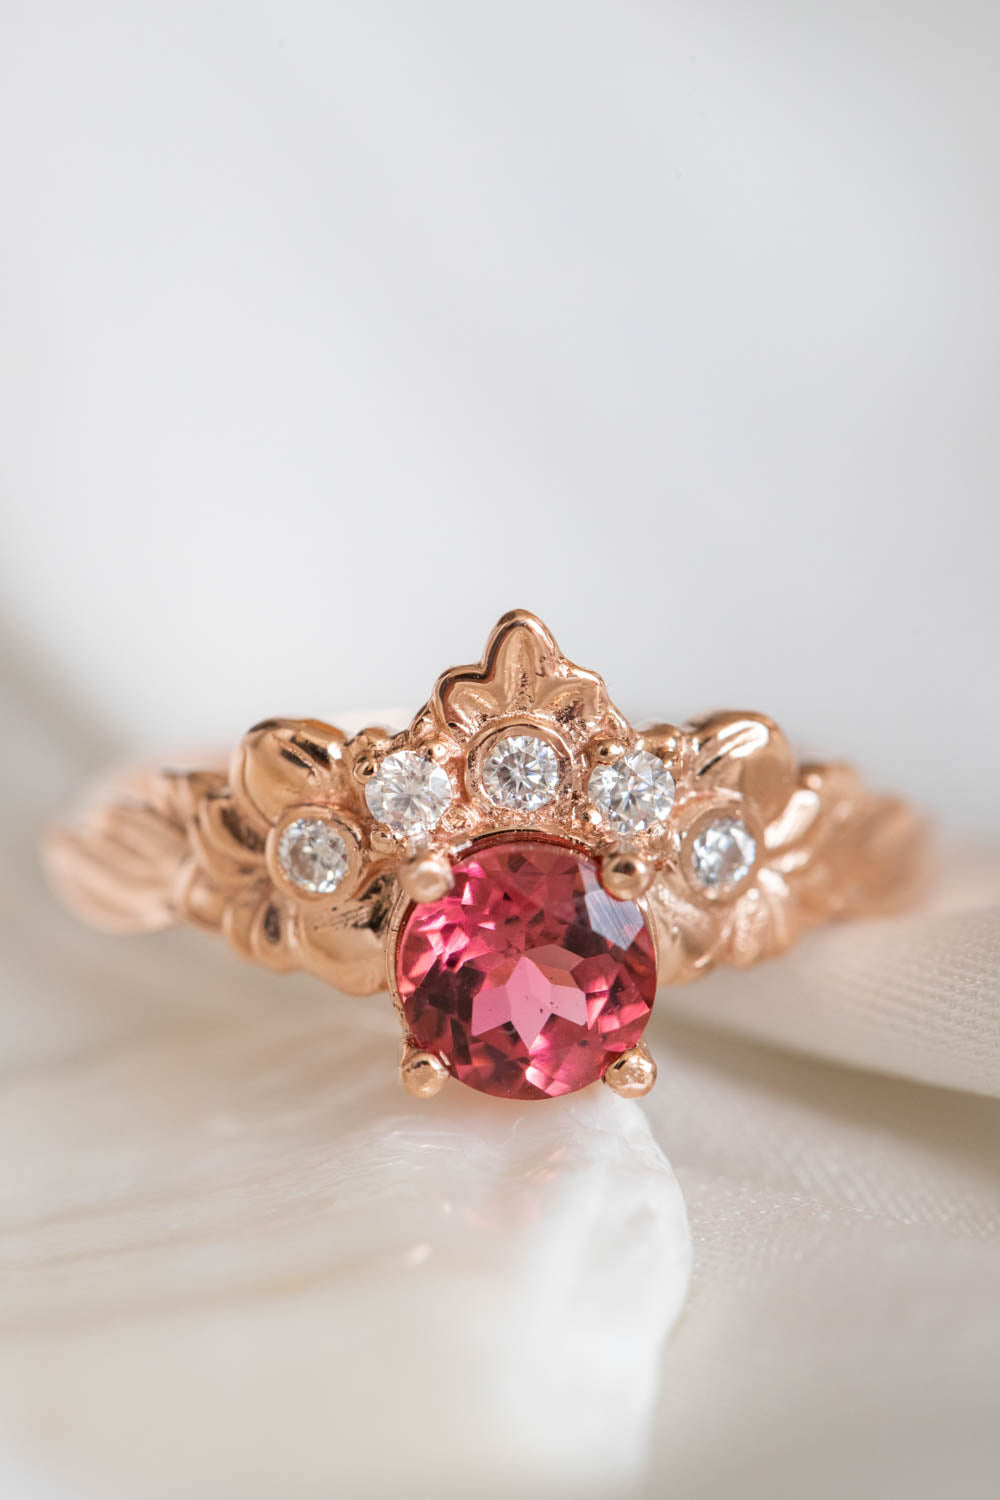 Flower Crown Engagement Ring with Pink Tourmaline, Botanic Inspired Diamond Engagement Ring / Forget Me Not